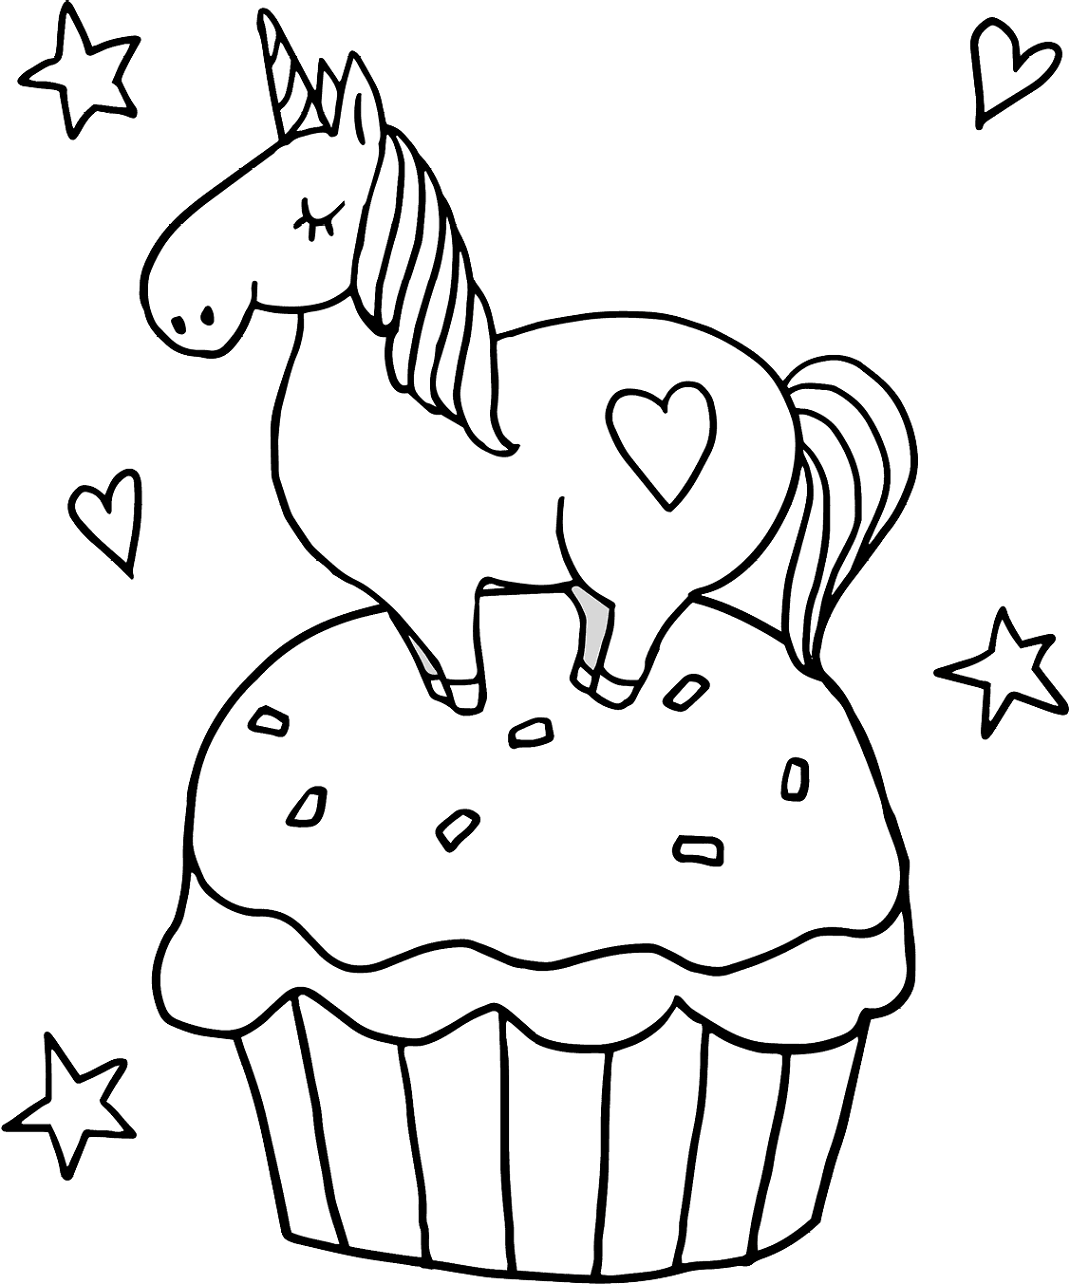 √ Cupcake Coloring Pages For Kids - Choose your favorite coloring page